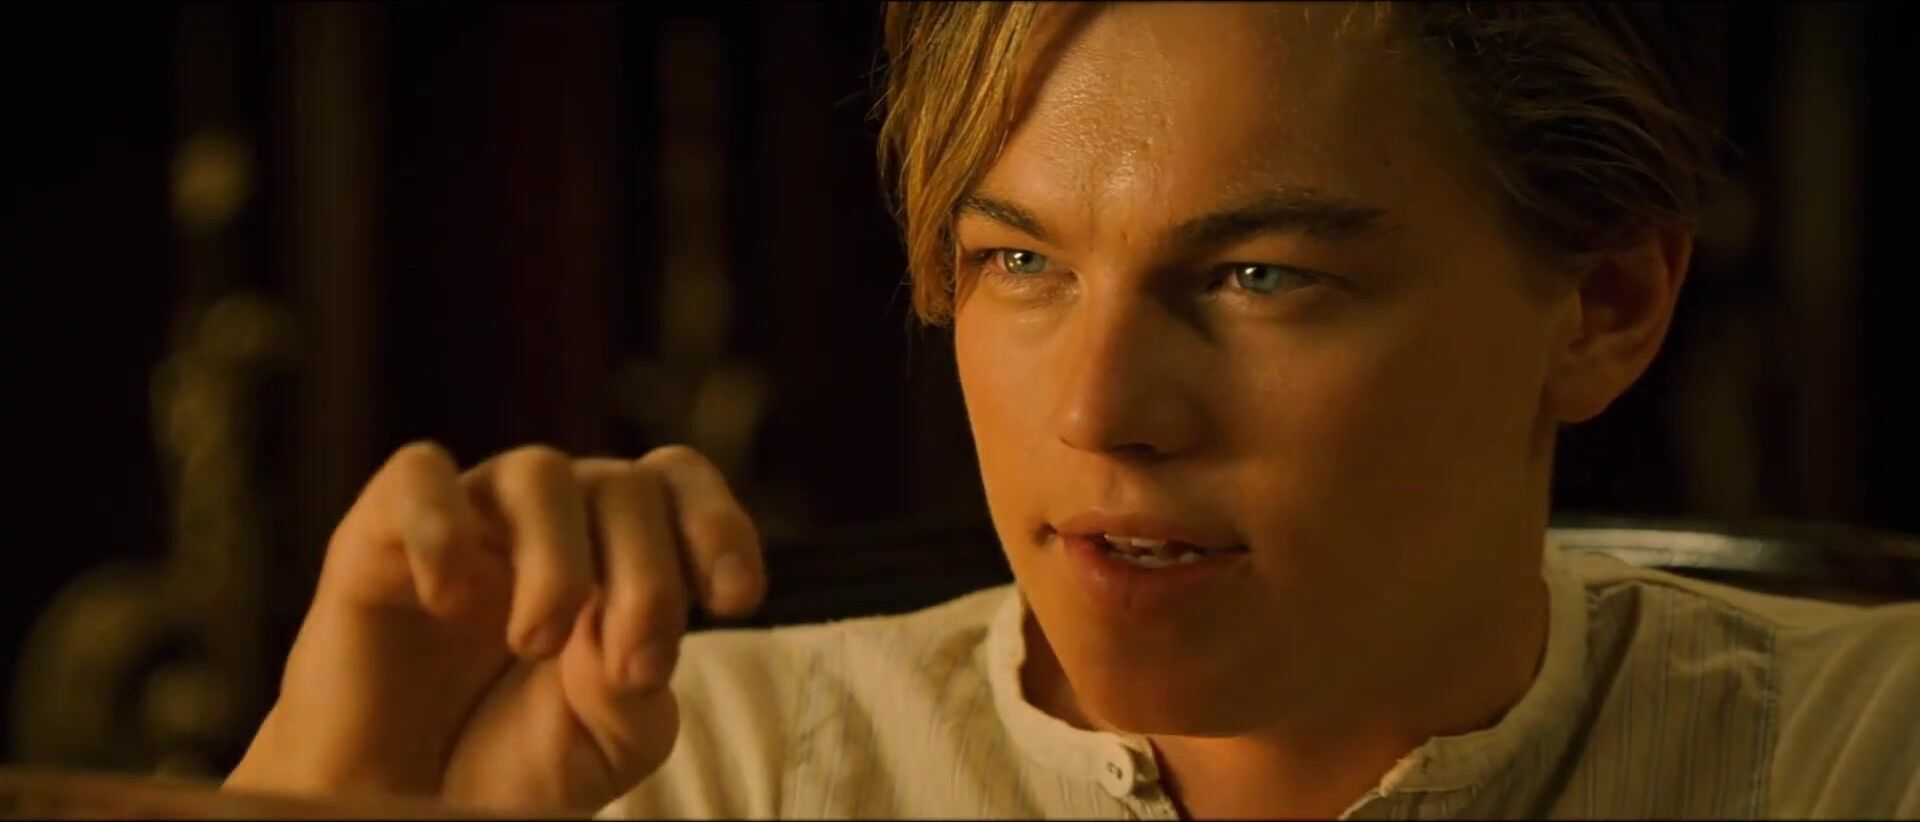 Teenage Sex Leonardo DiCaprio loves chick's body and draws her before fucking in Titanic (1997) Daring - 2